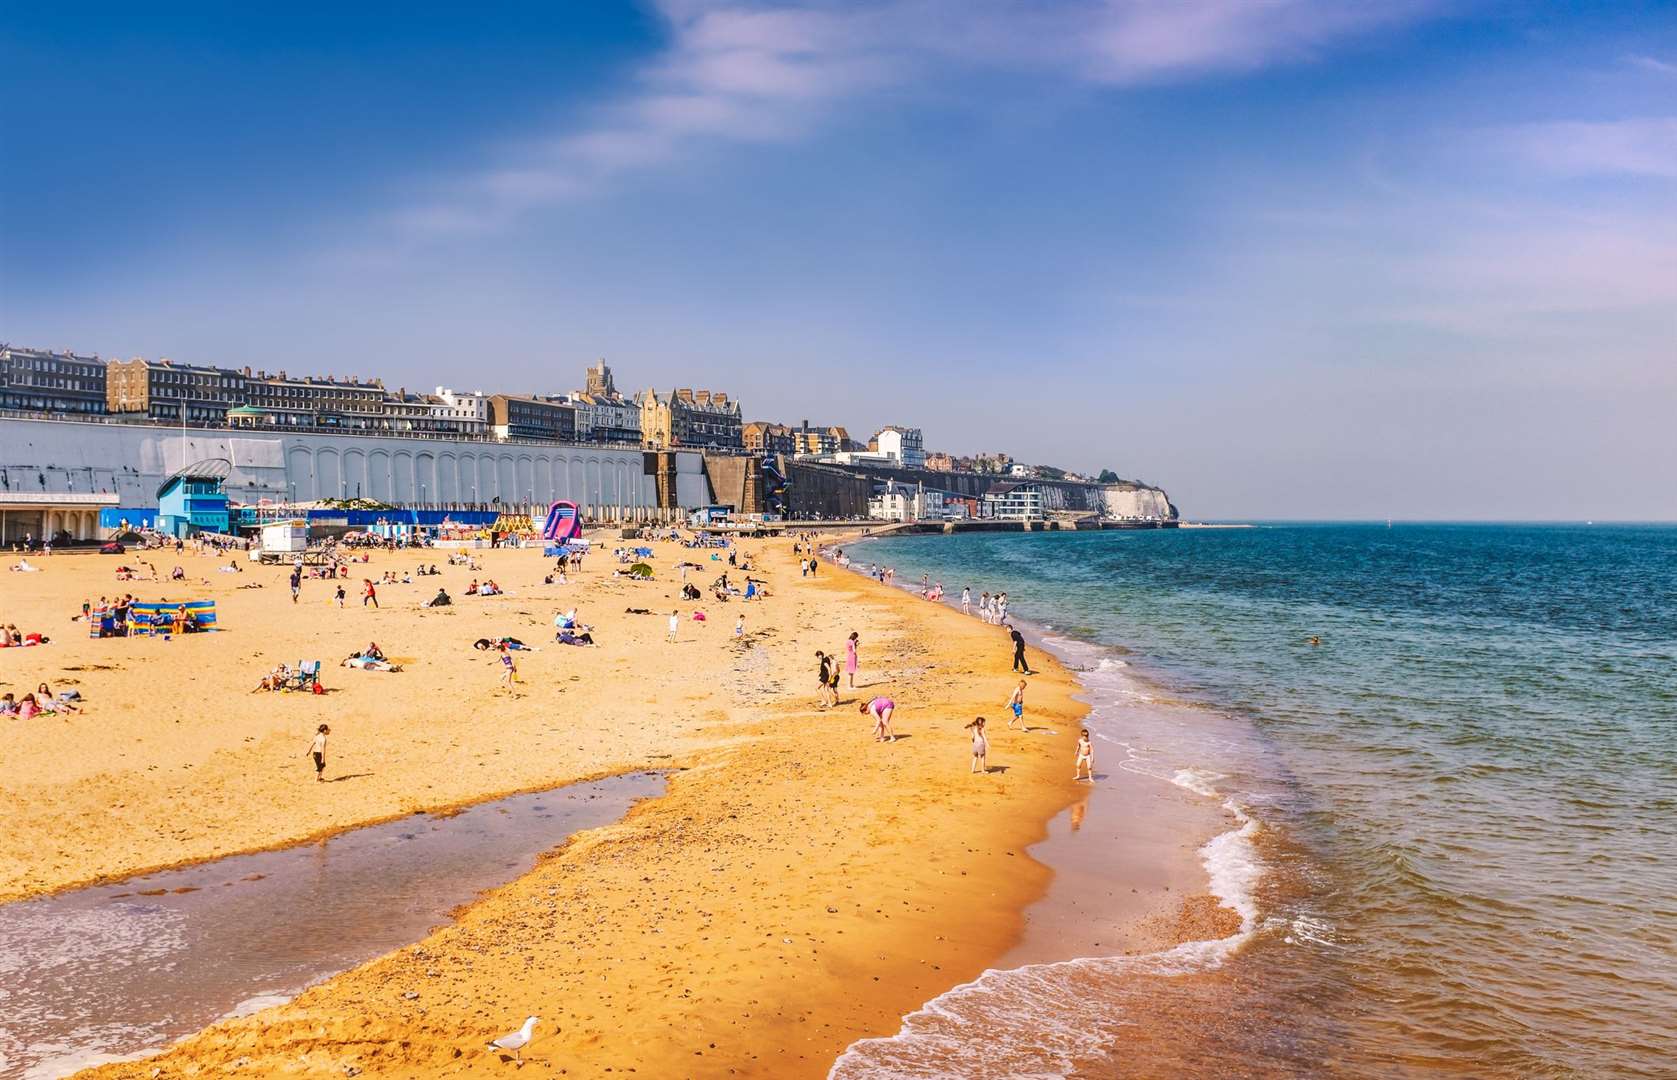 Destination Kent 2019 has a guide to the county's beaches, including Ramsgate's main sands